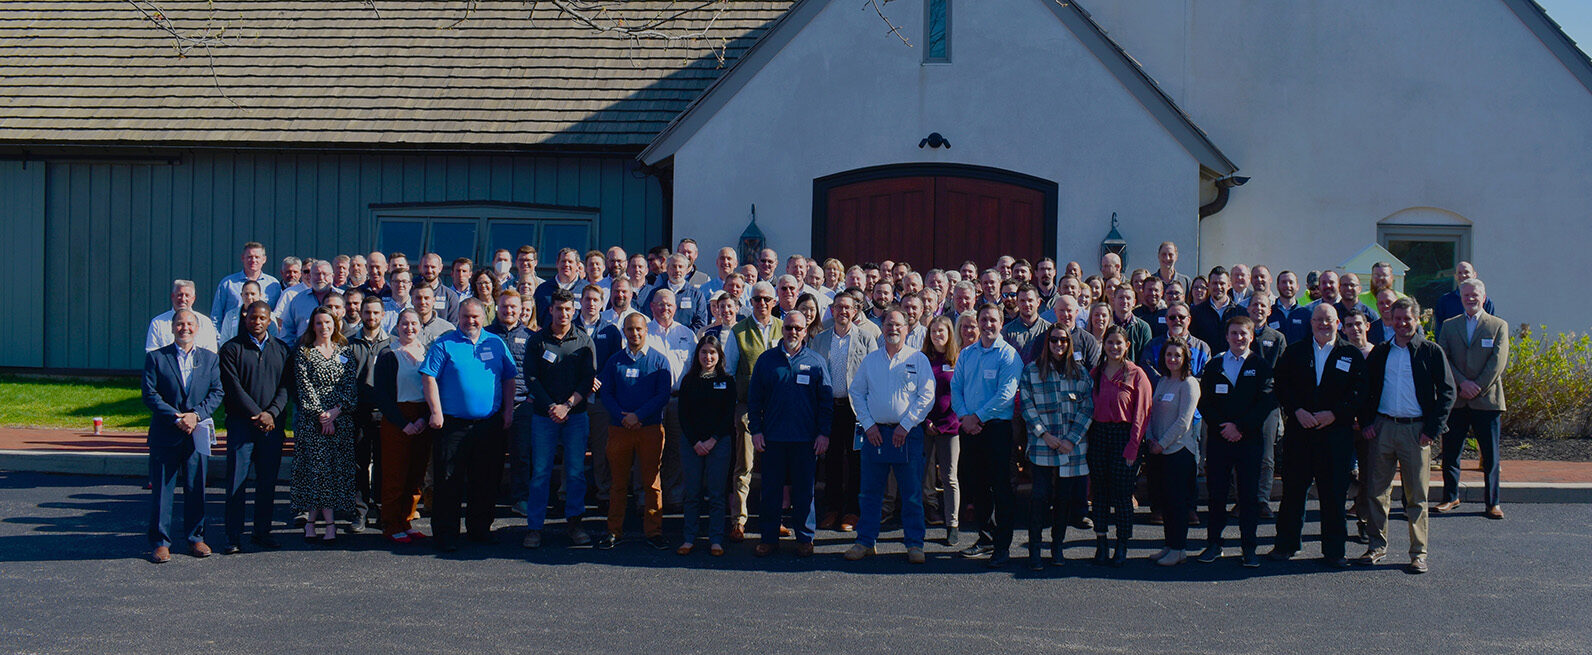 All IMC employees after a Company wide meeting in Malvern, PA